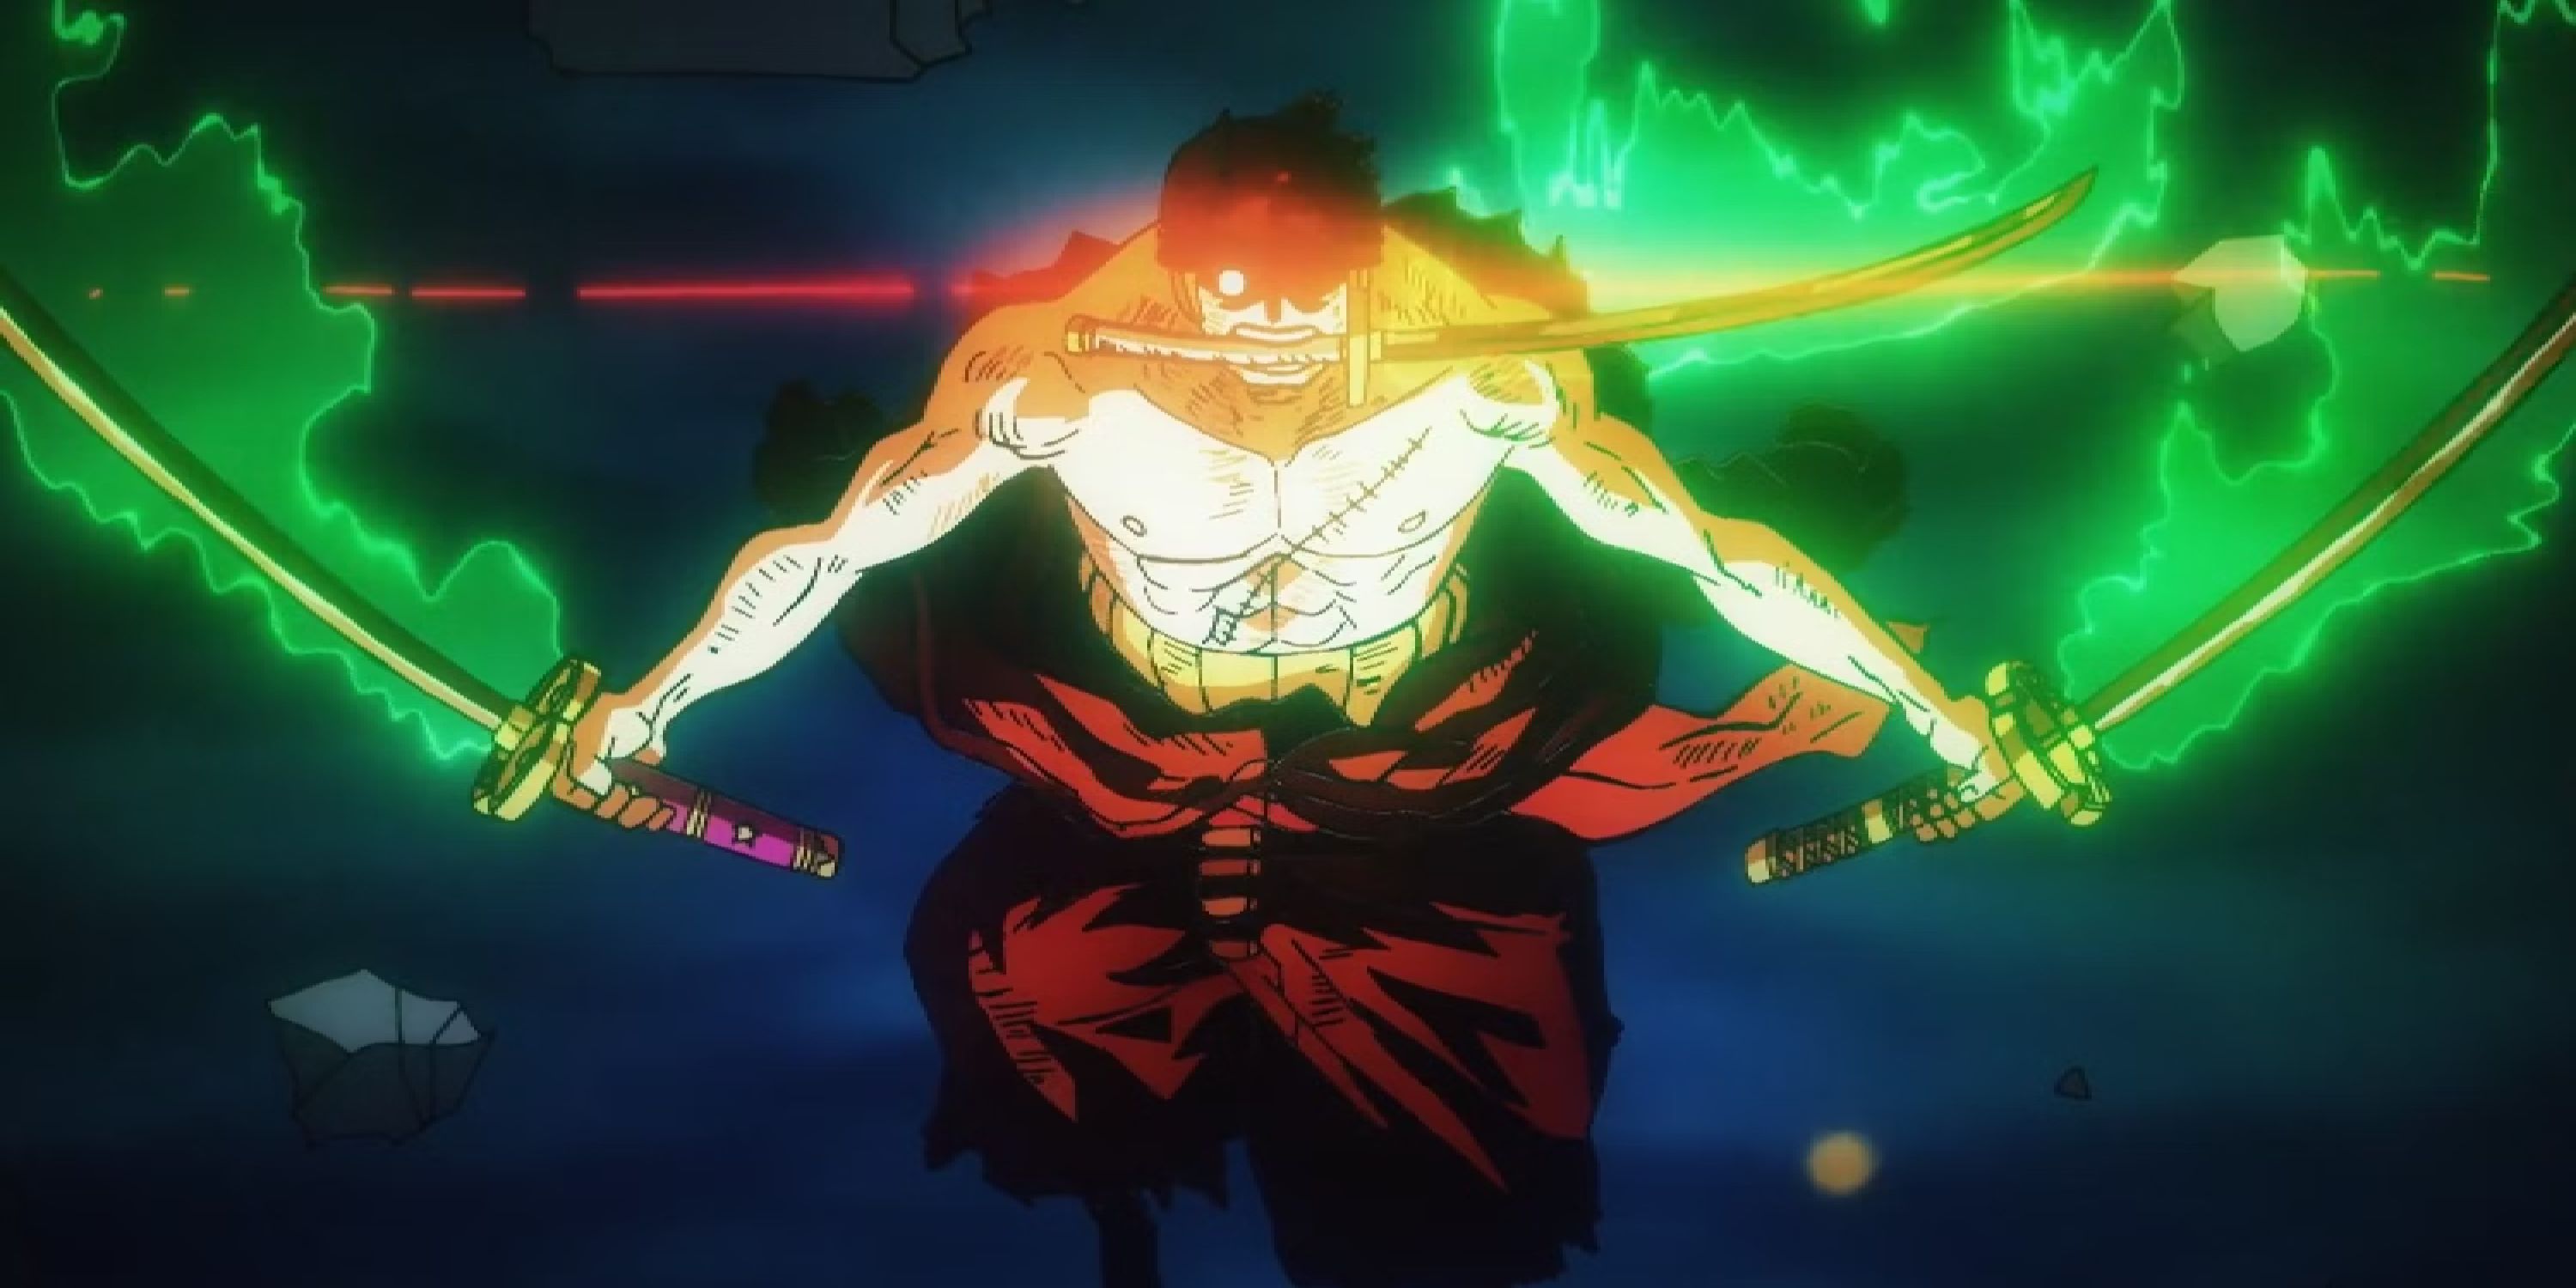 King of Hell Zoro defeats King in the One Piece anime